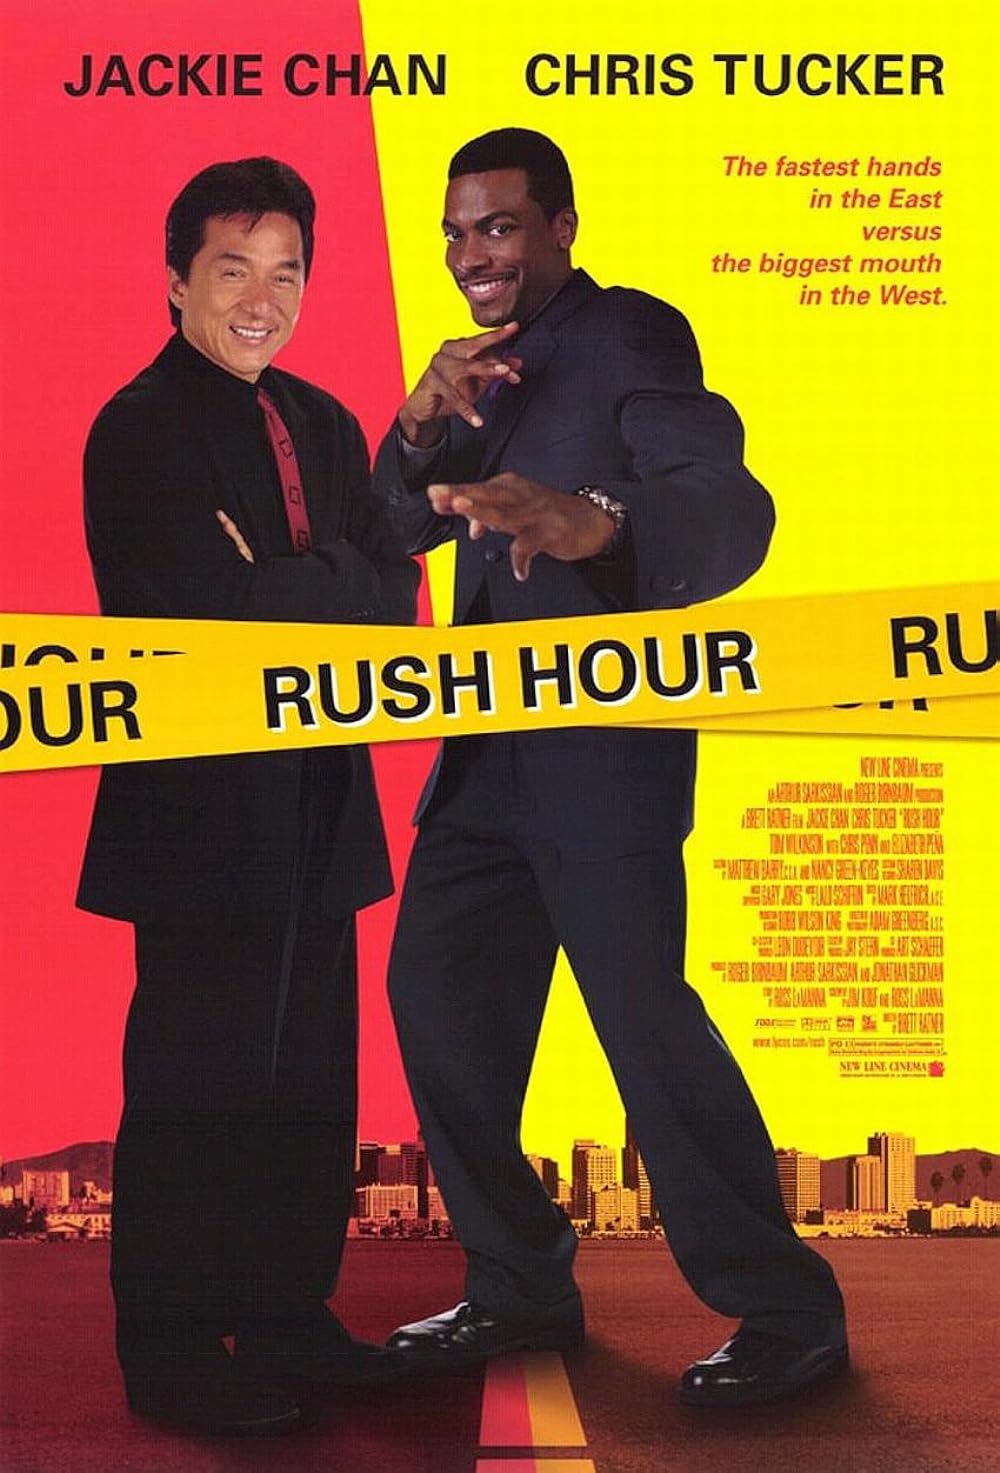 blake edler recommends rush hour 1 full movie download pic